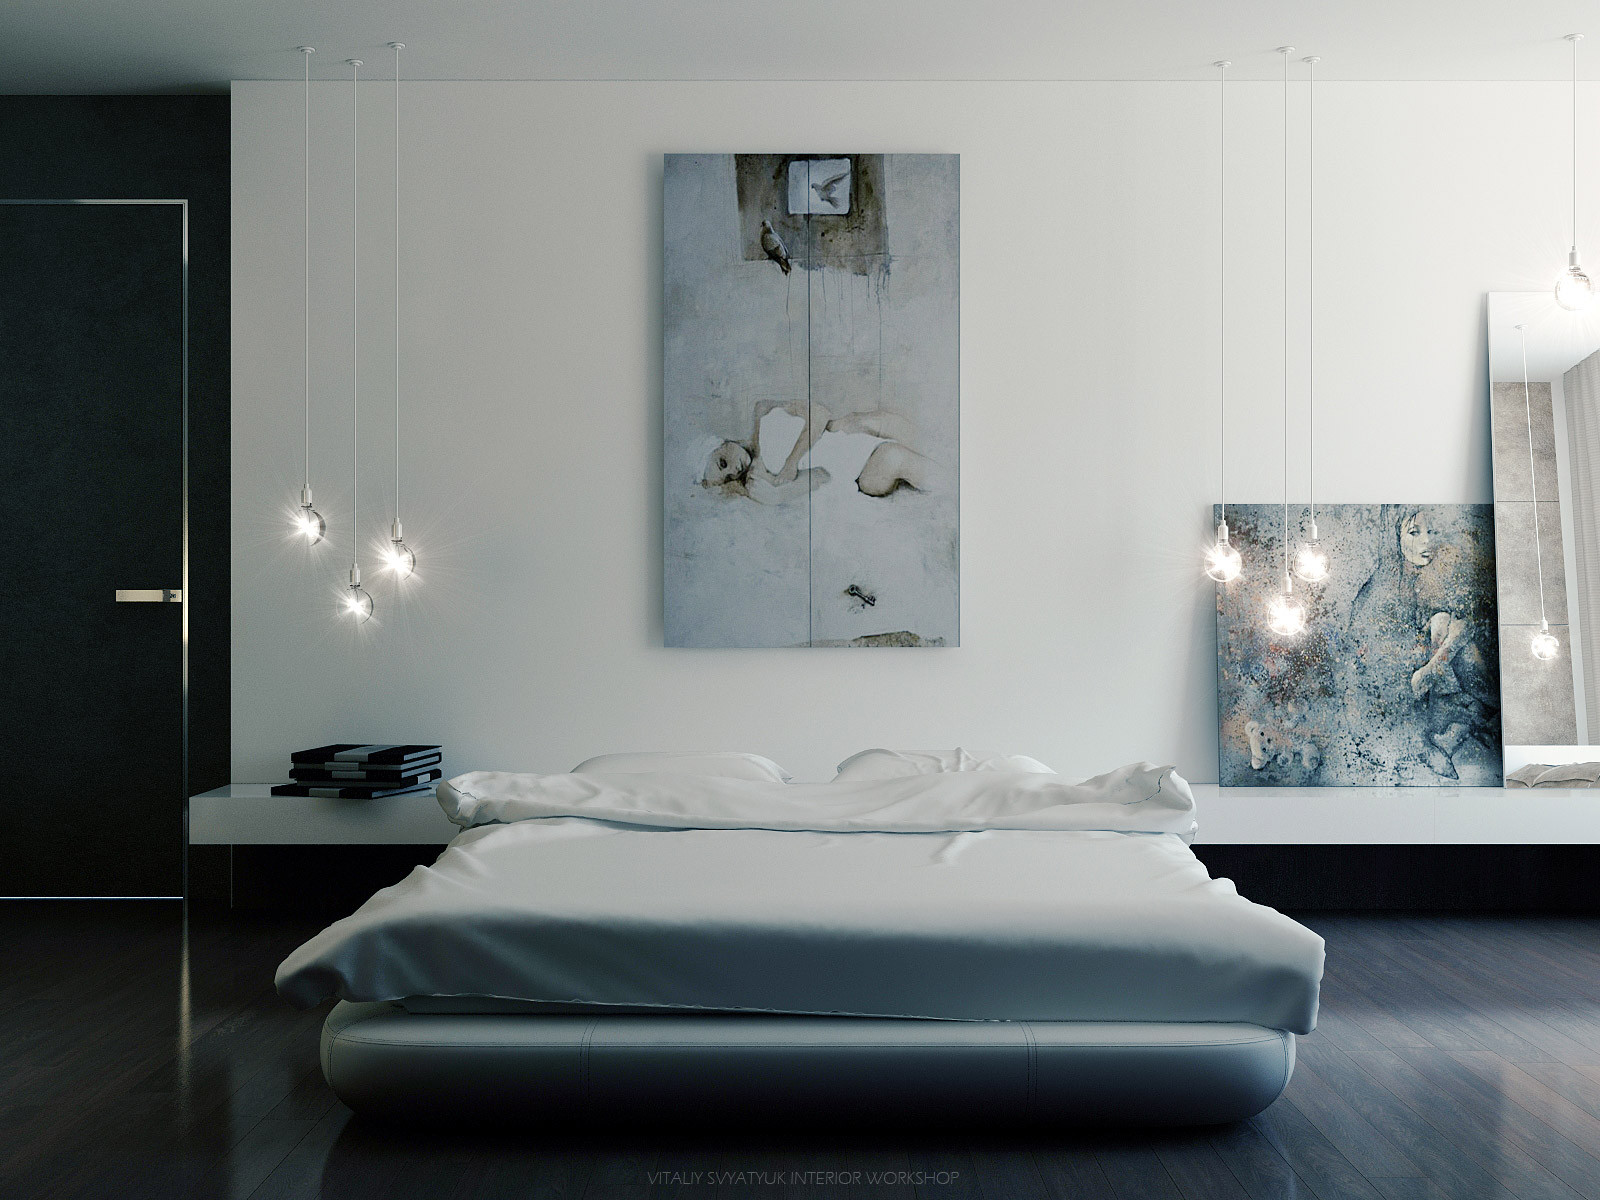 Cool Wall Art For Bedroom
 The Art of Hanging Art